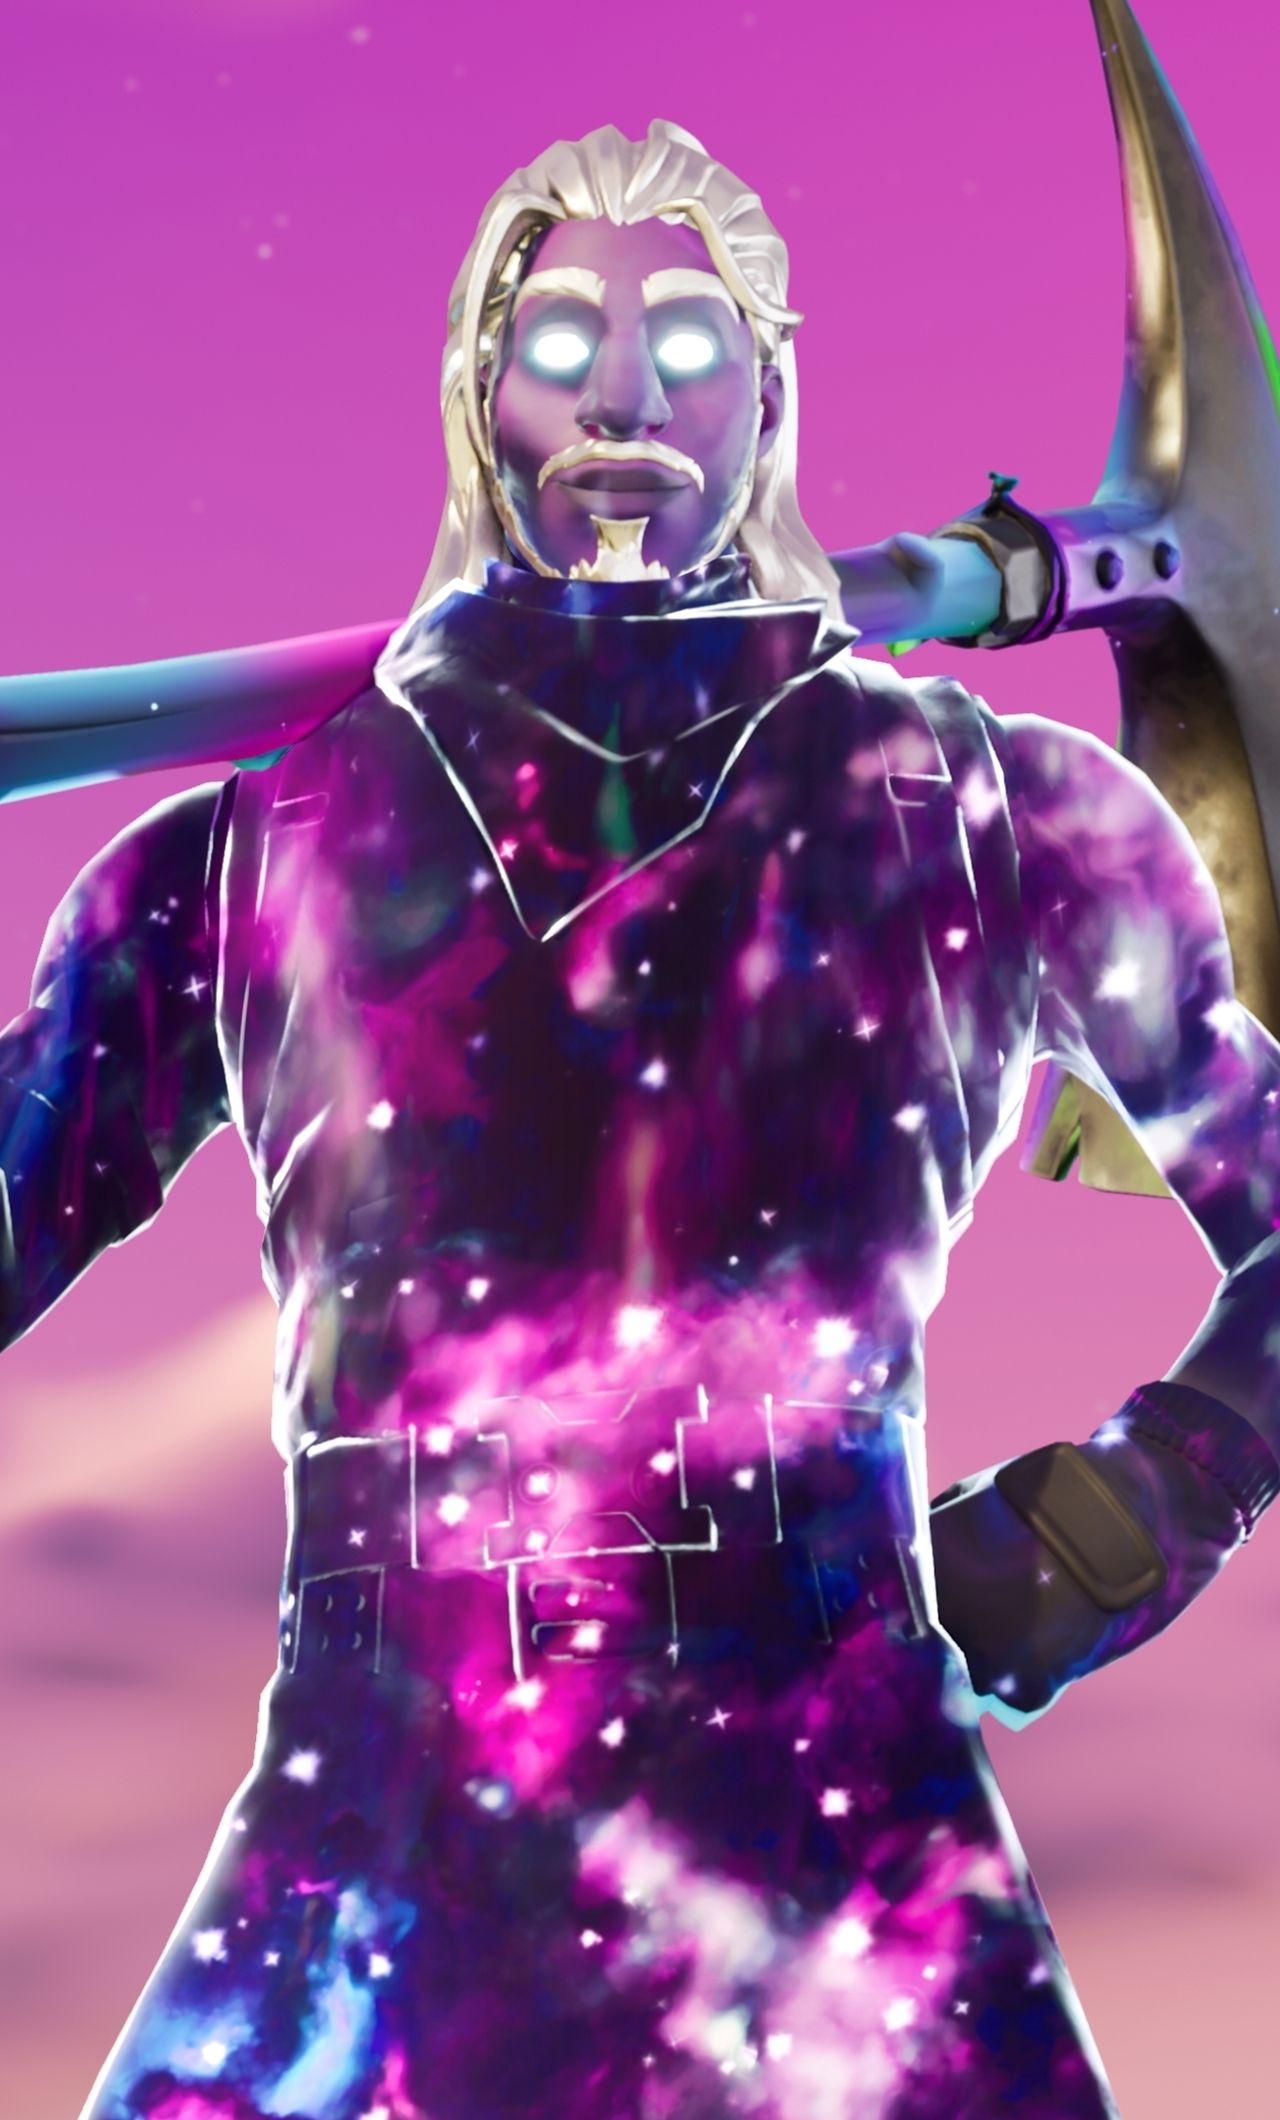 Fortnite Galaxy Wallpapers Top Free Fortnite Galaxy Backgrounds Wallpaperaccess